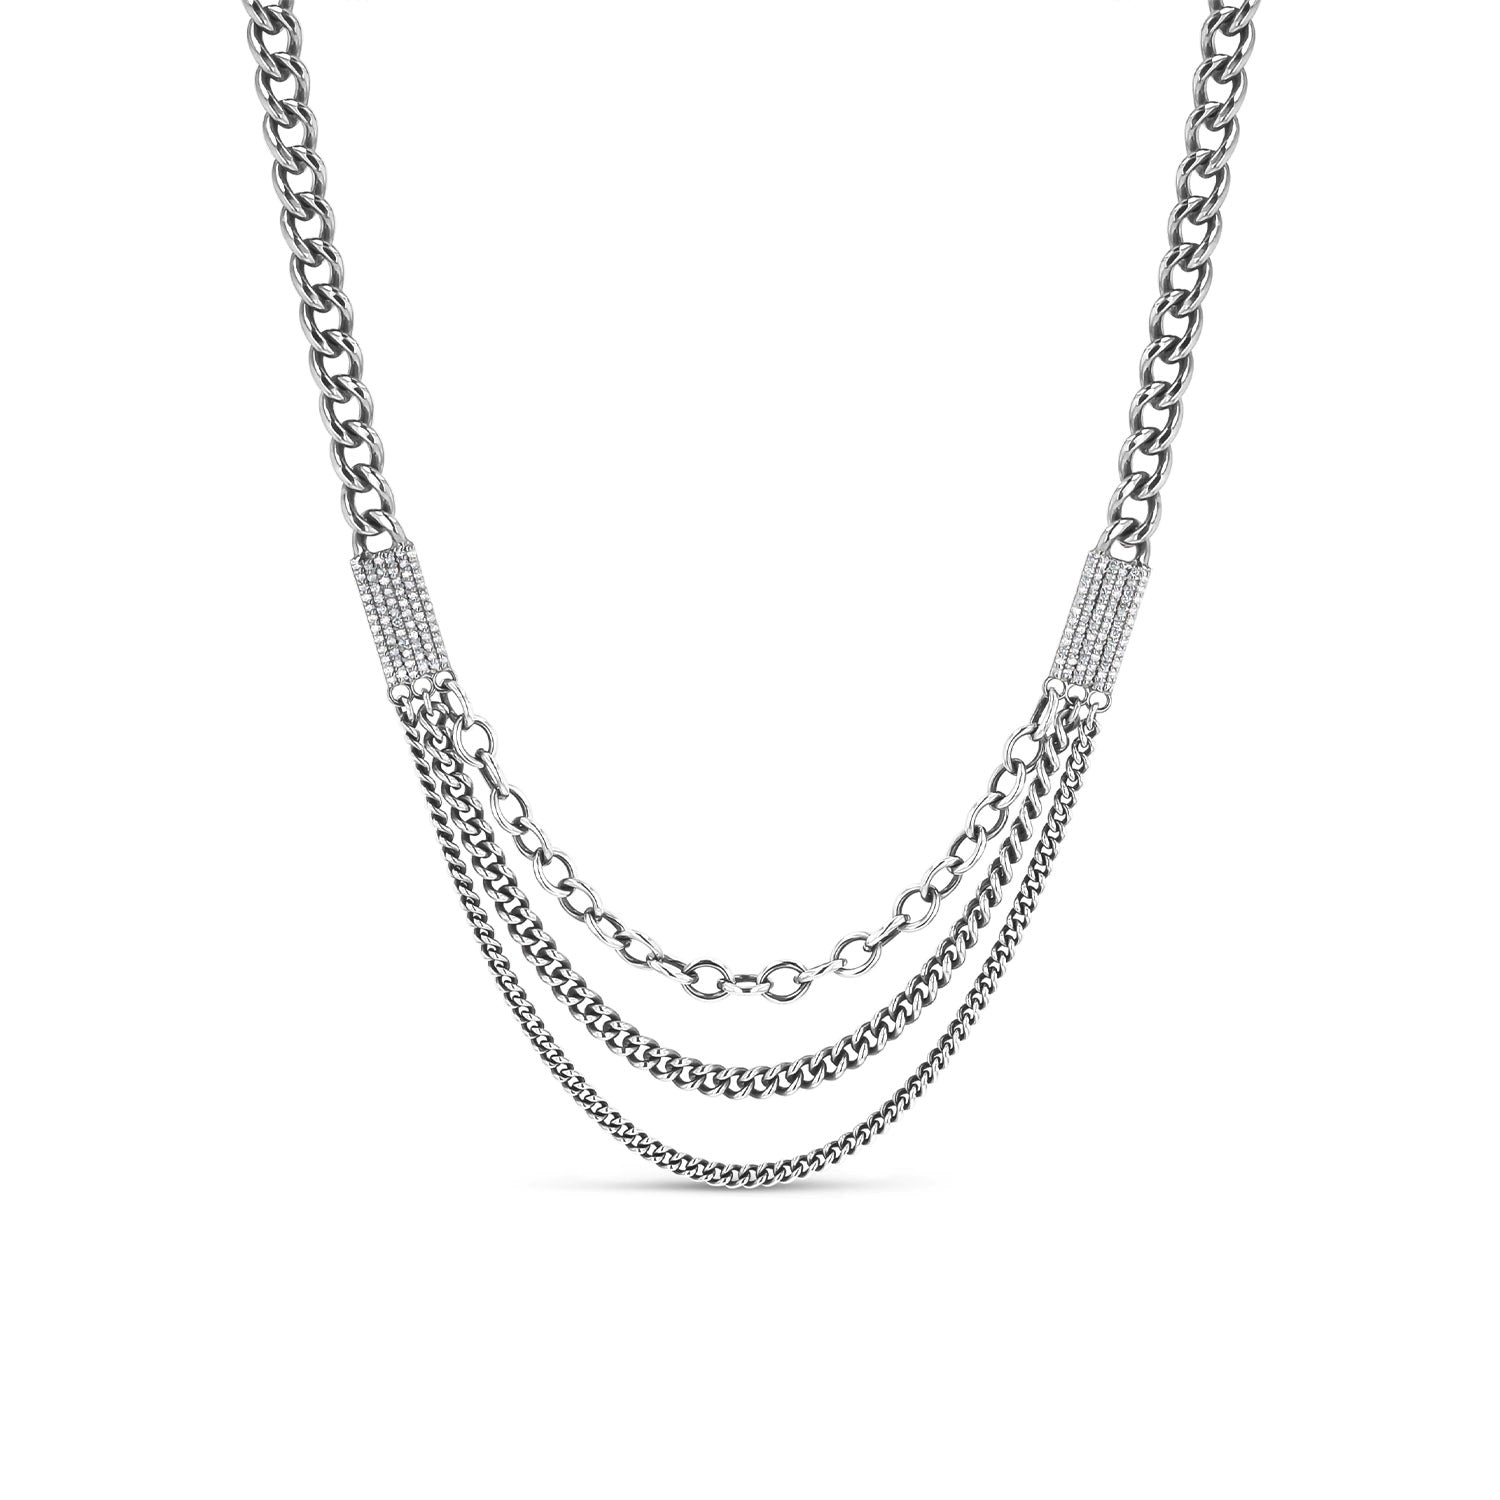 Multi-Chain Sterling Silver Necklace